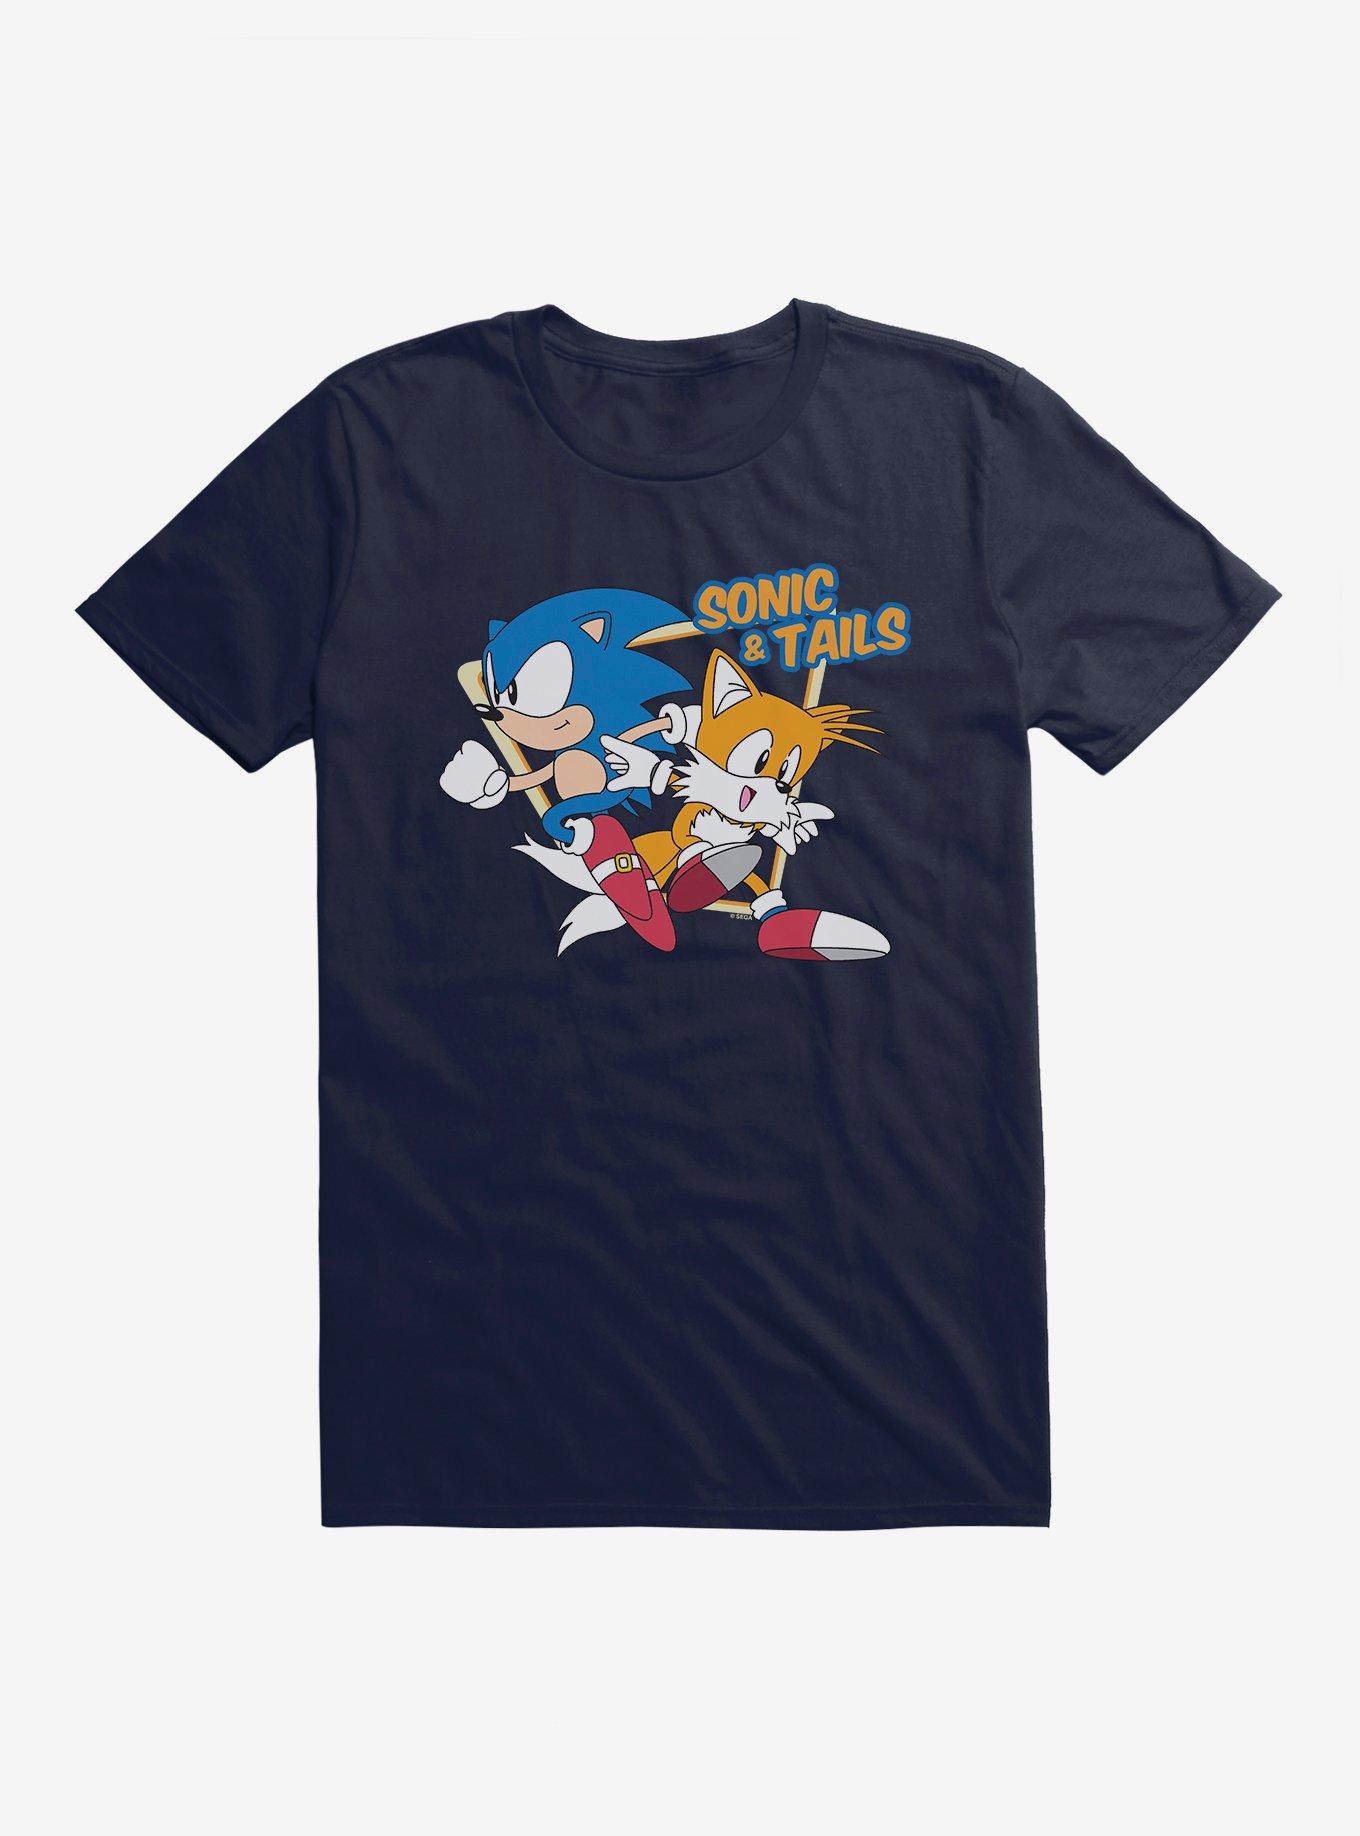 Sonic The Hedgehog Sonic And Tails T-Shirt, NAVY, hi-res